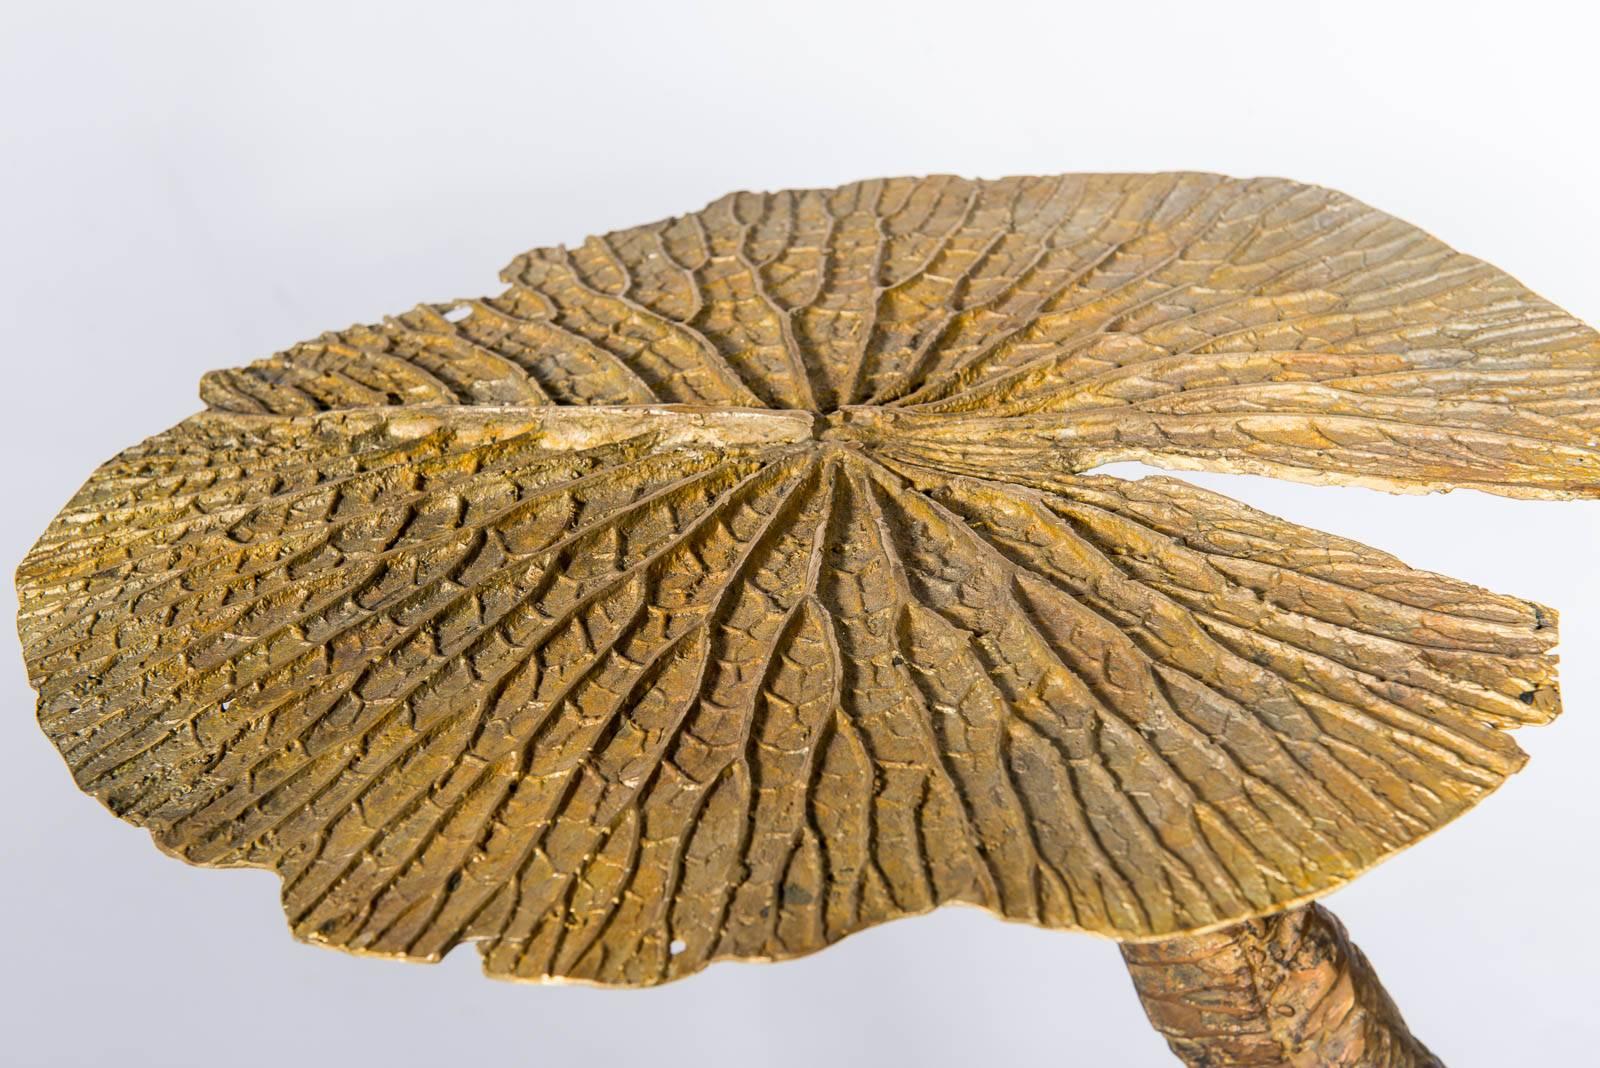 Coffee Table by Frederic DAD in Hammered Bronze, Model Lily, 2015.